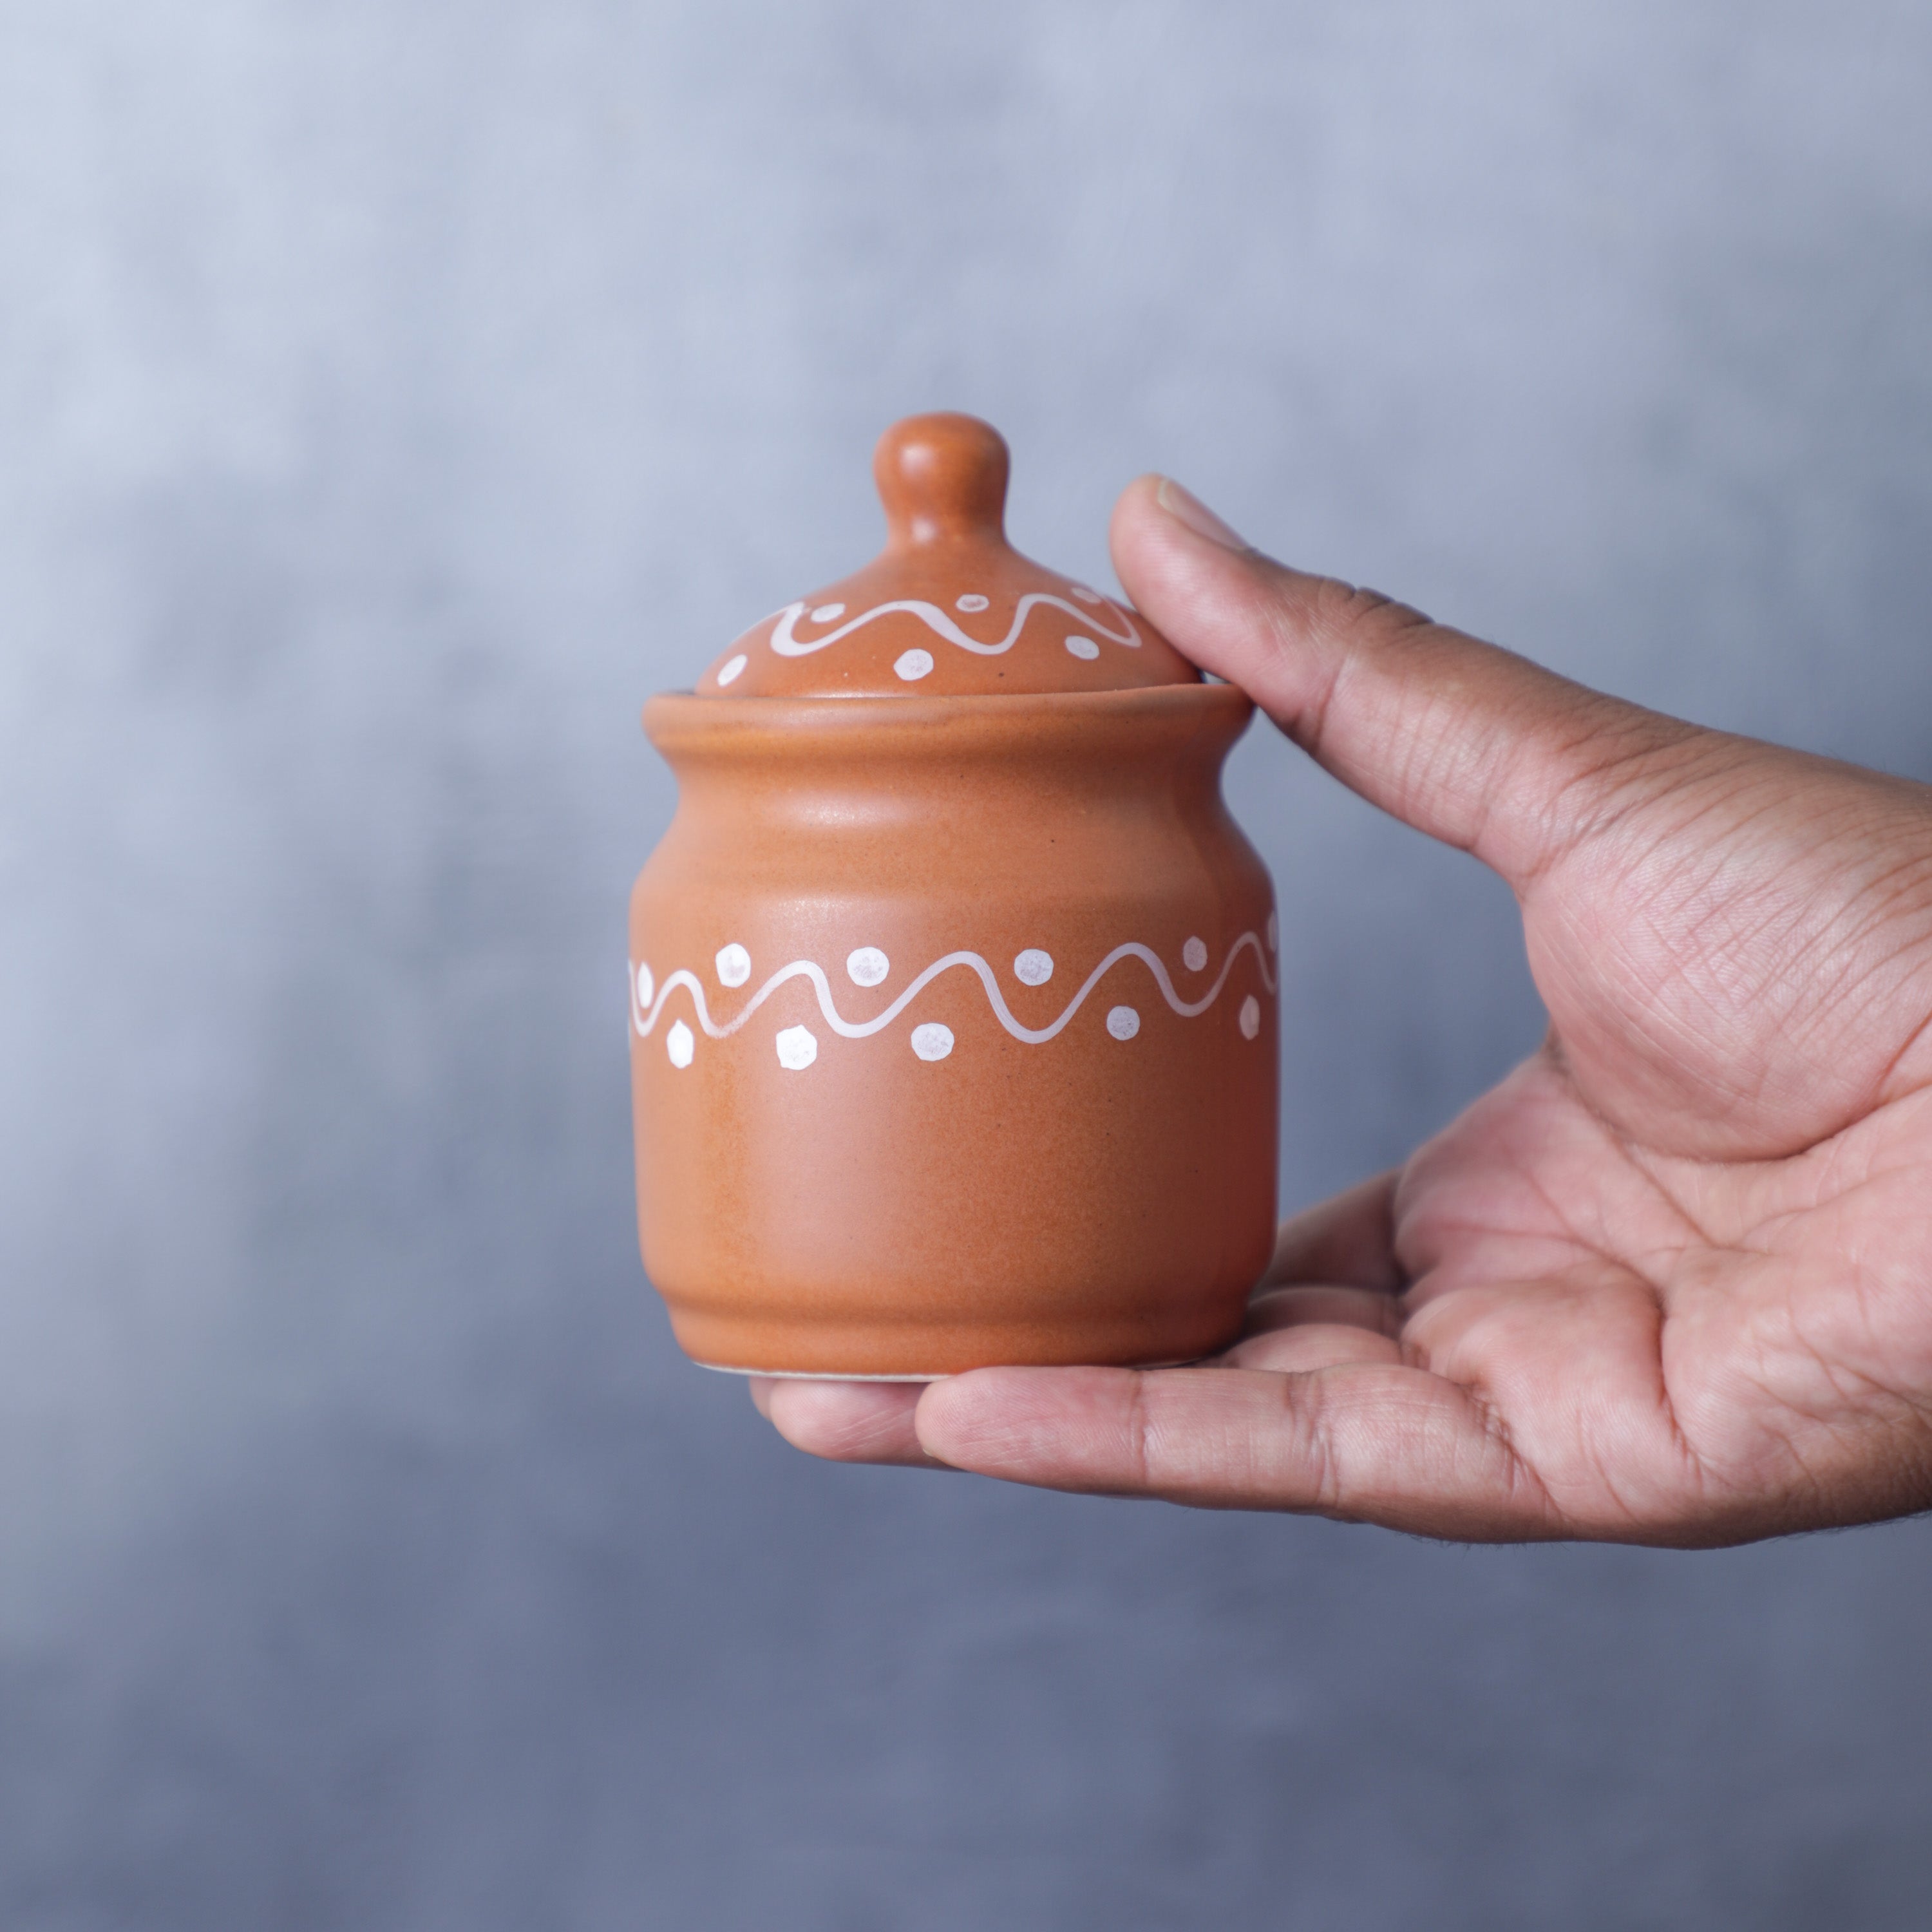 Ceramic Condiment Jars - Proudly Made in India from Desifavors